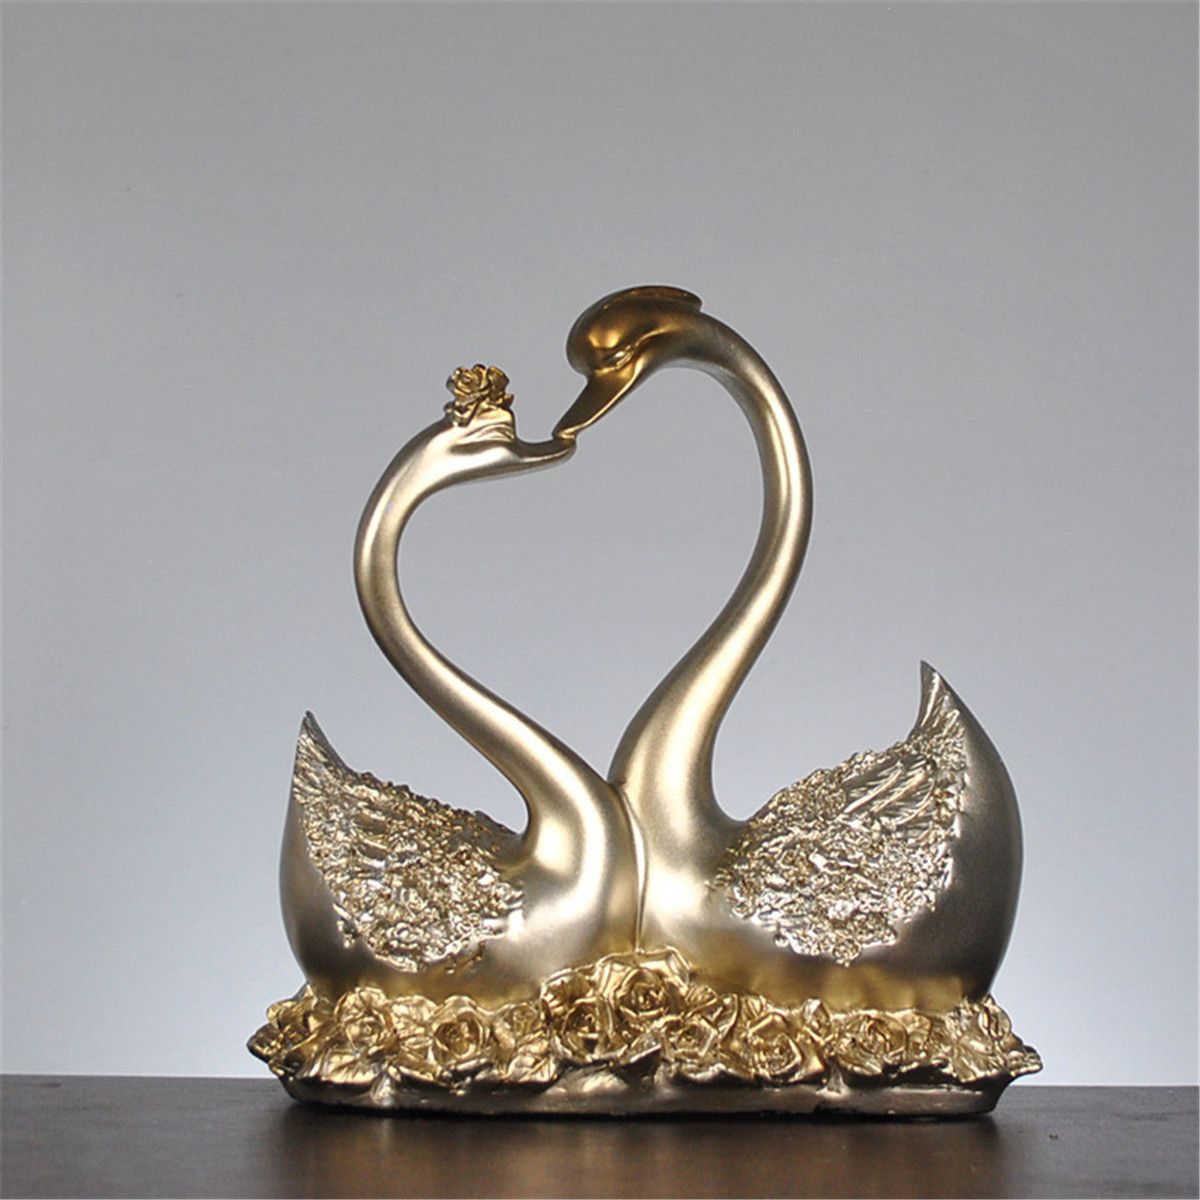 Modern-Couples-Swan-Resin-statue-Craft-Home-Wedding-Ornament-Cabinet-Decorations-1461261